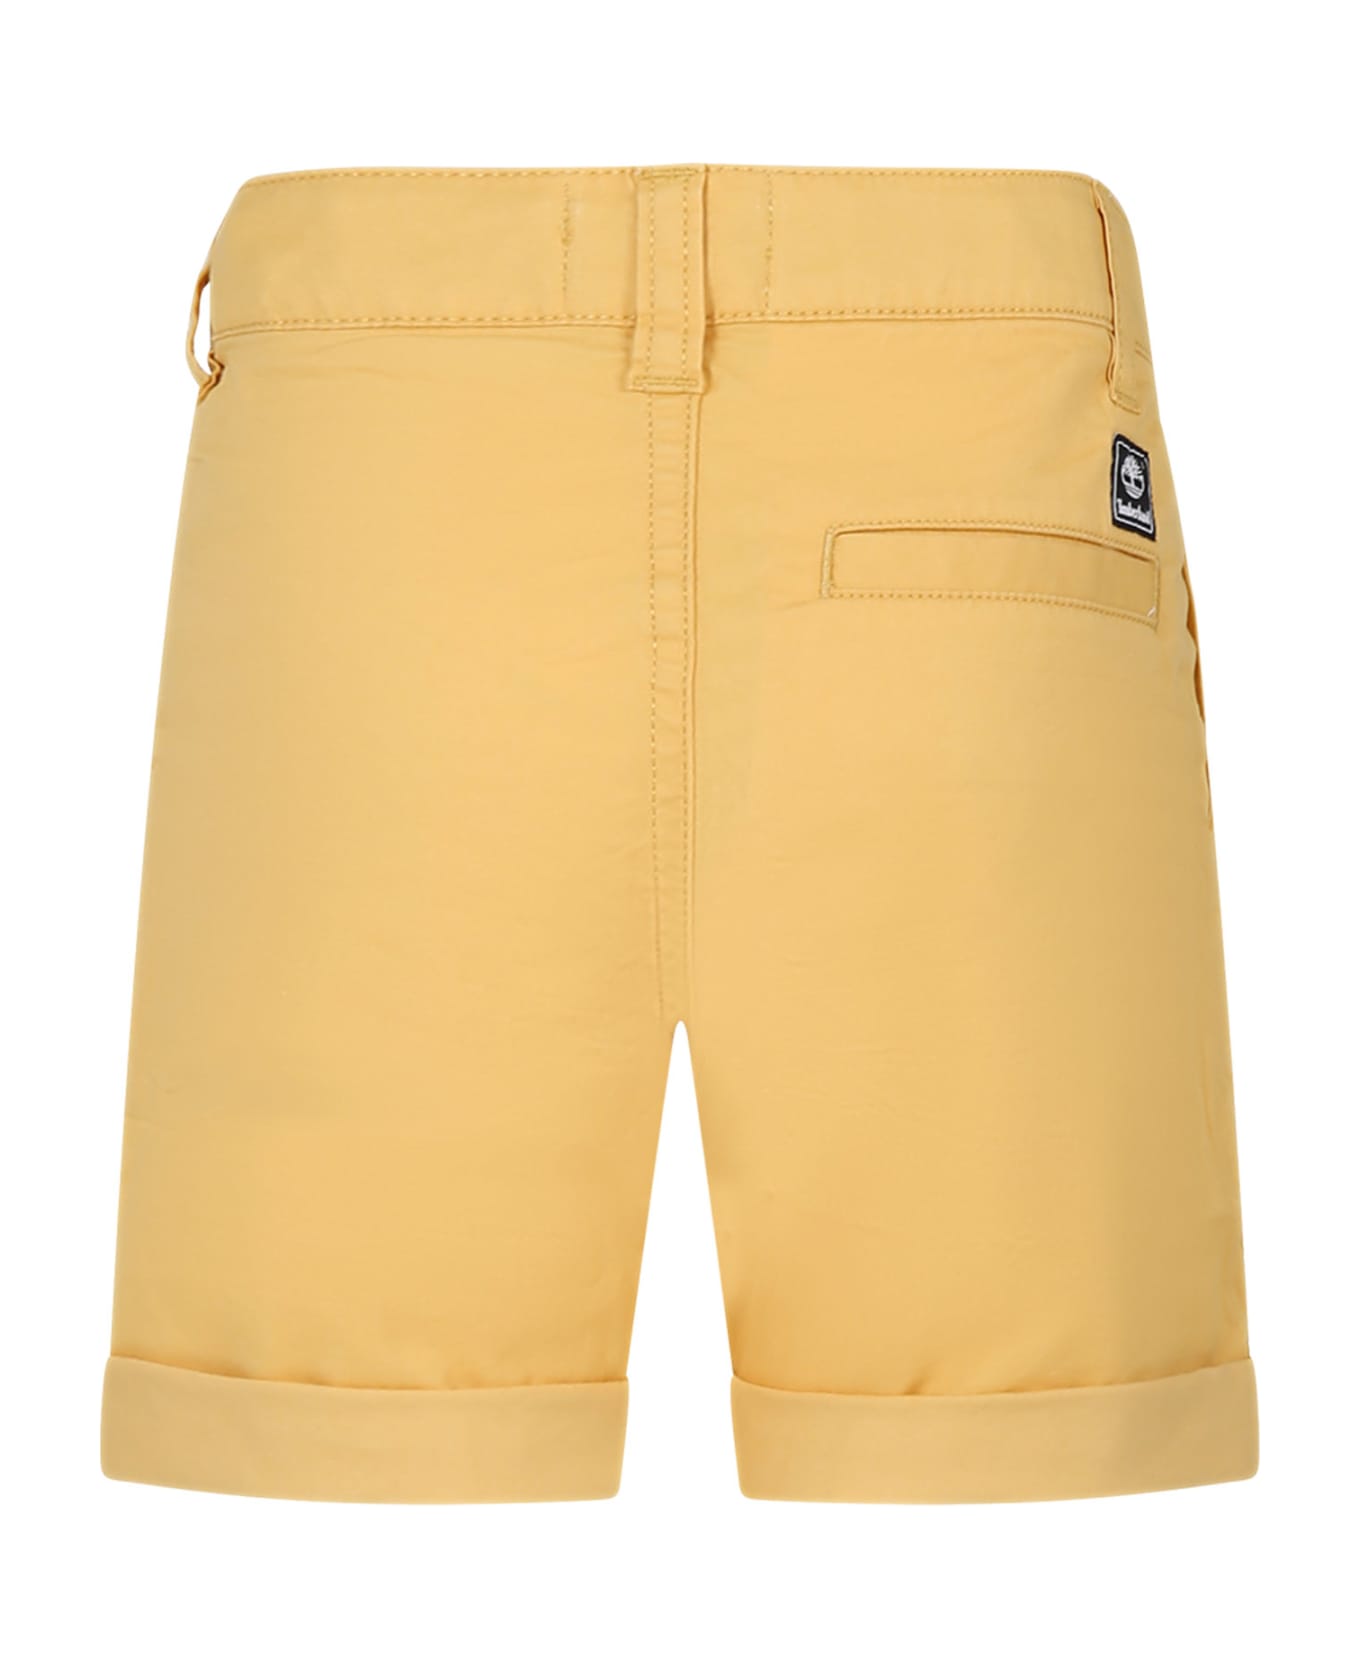 Timberland Yellow Shorts For Boy With Logo - Yellow ボトムス